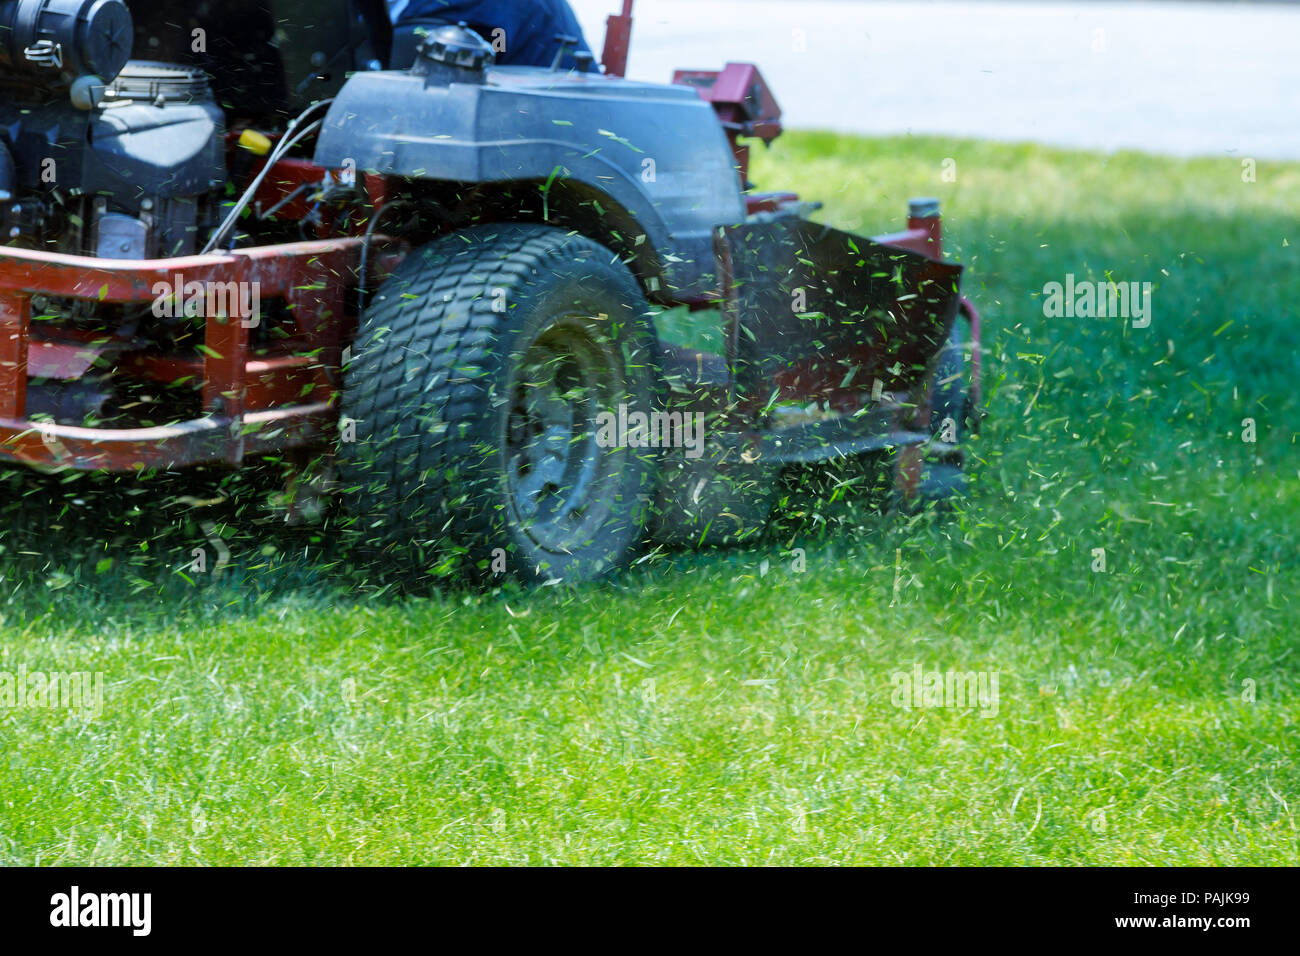 Red Lawn mower cutting grass. Gardening concept Stock Photo